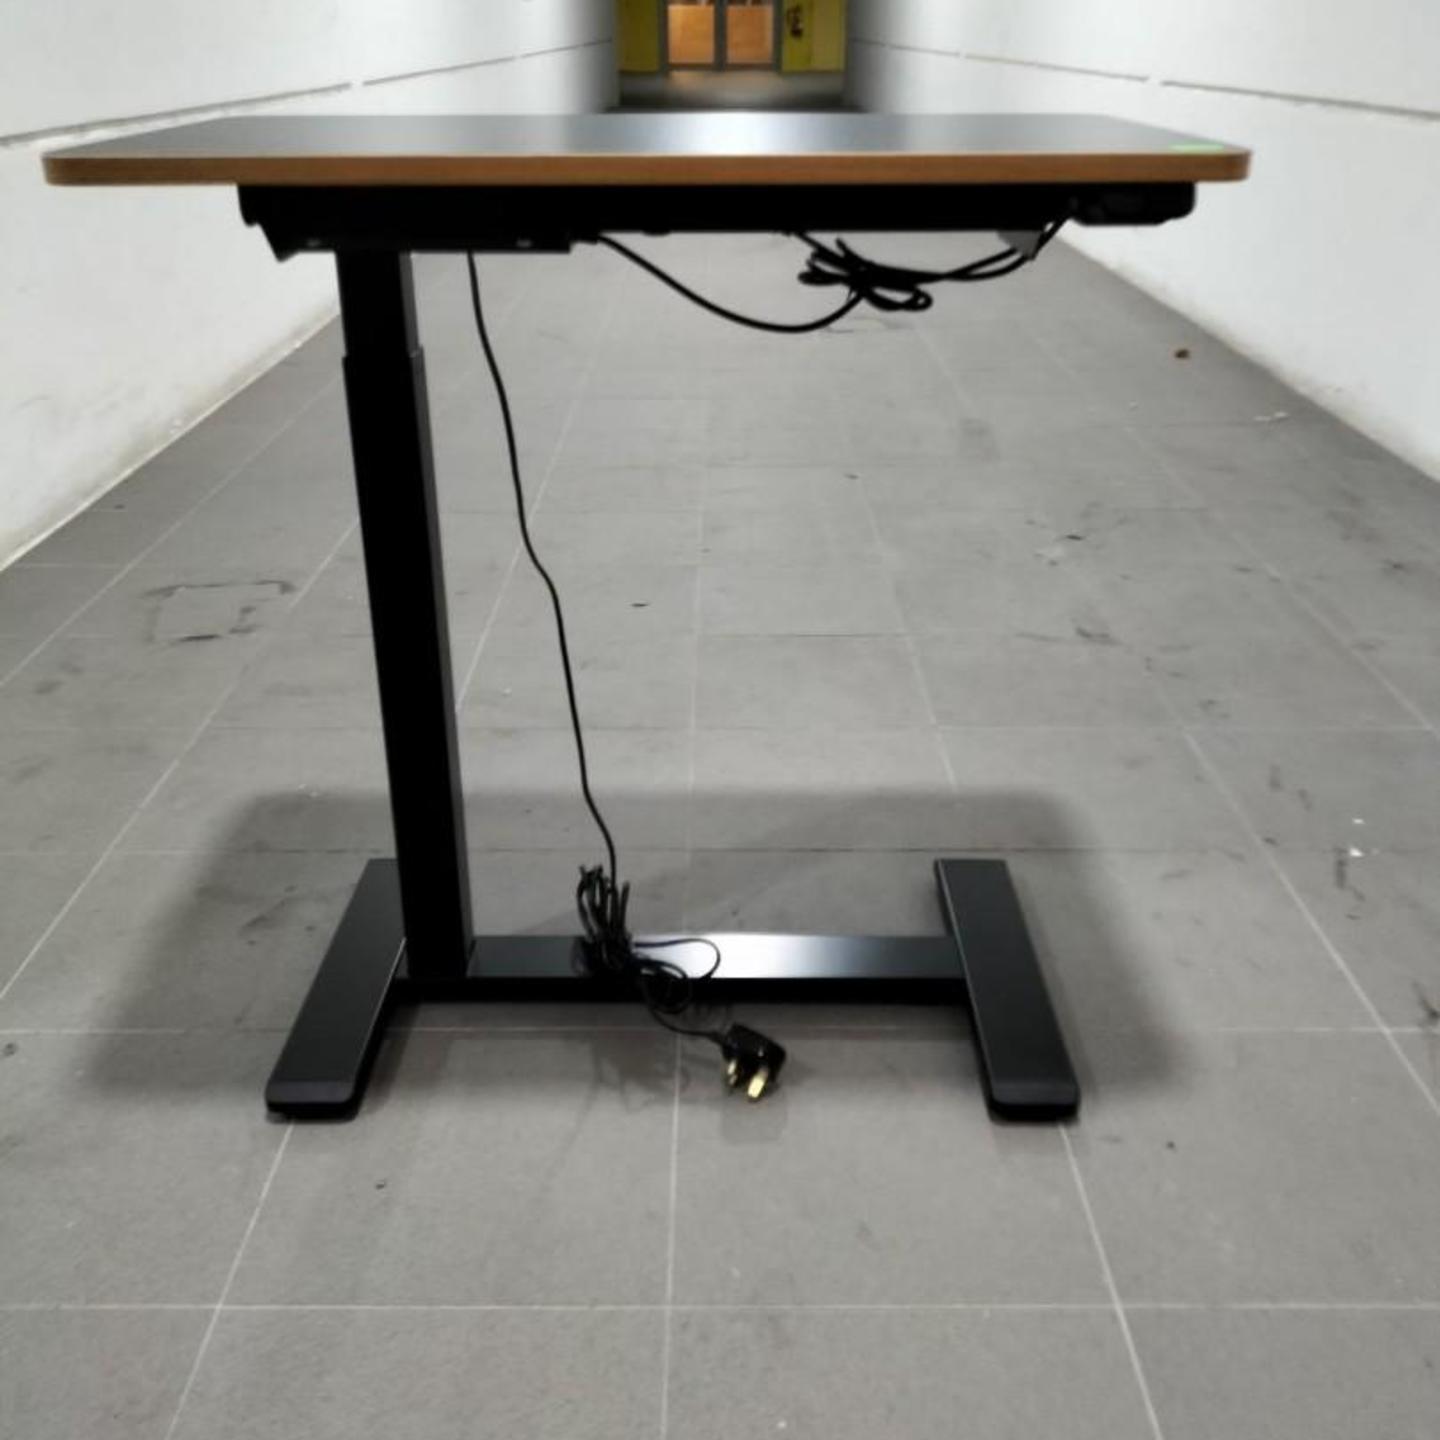 BILL Electric Adjustable Multi Function Table in BLACK